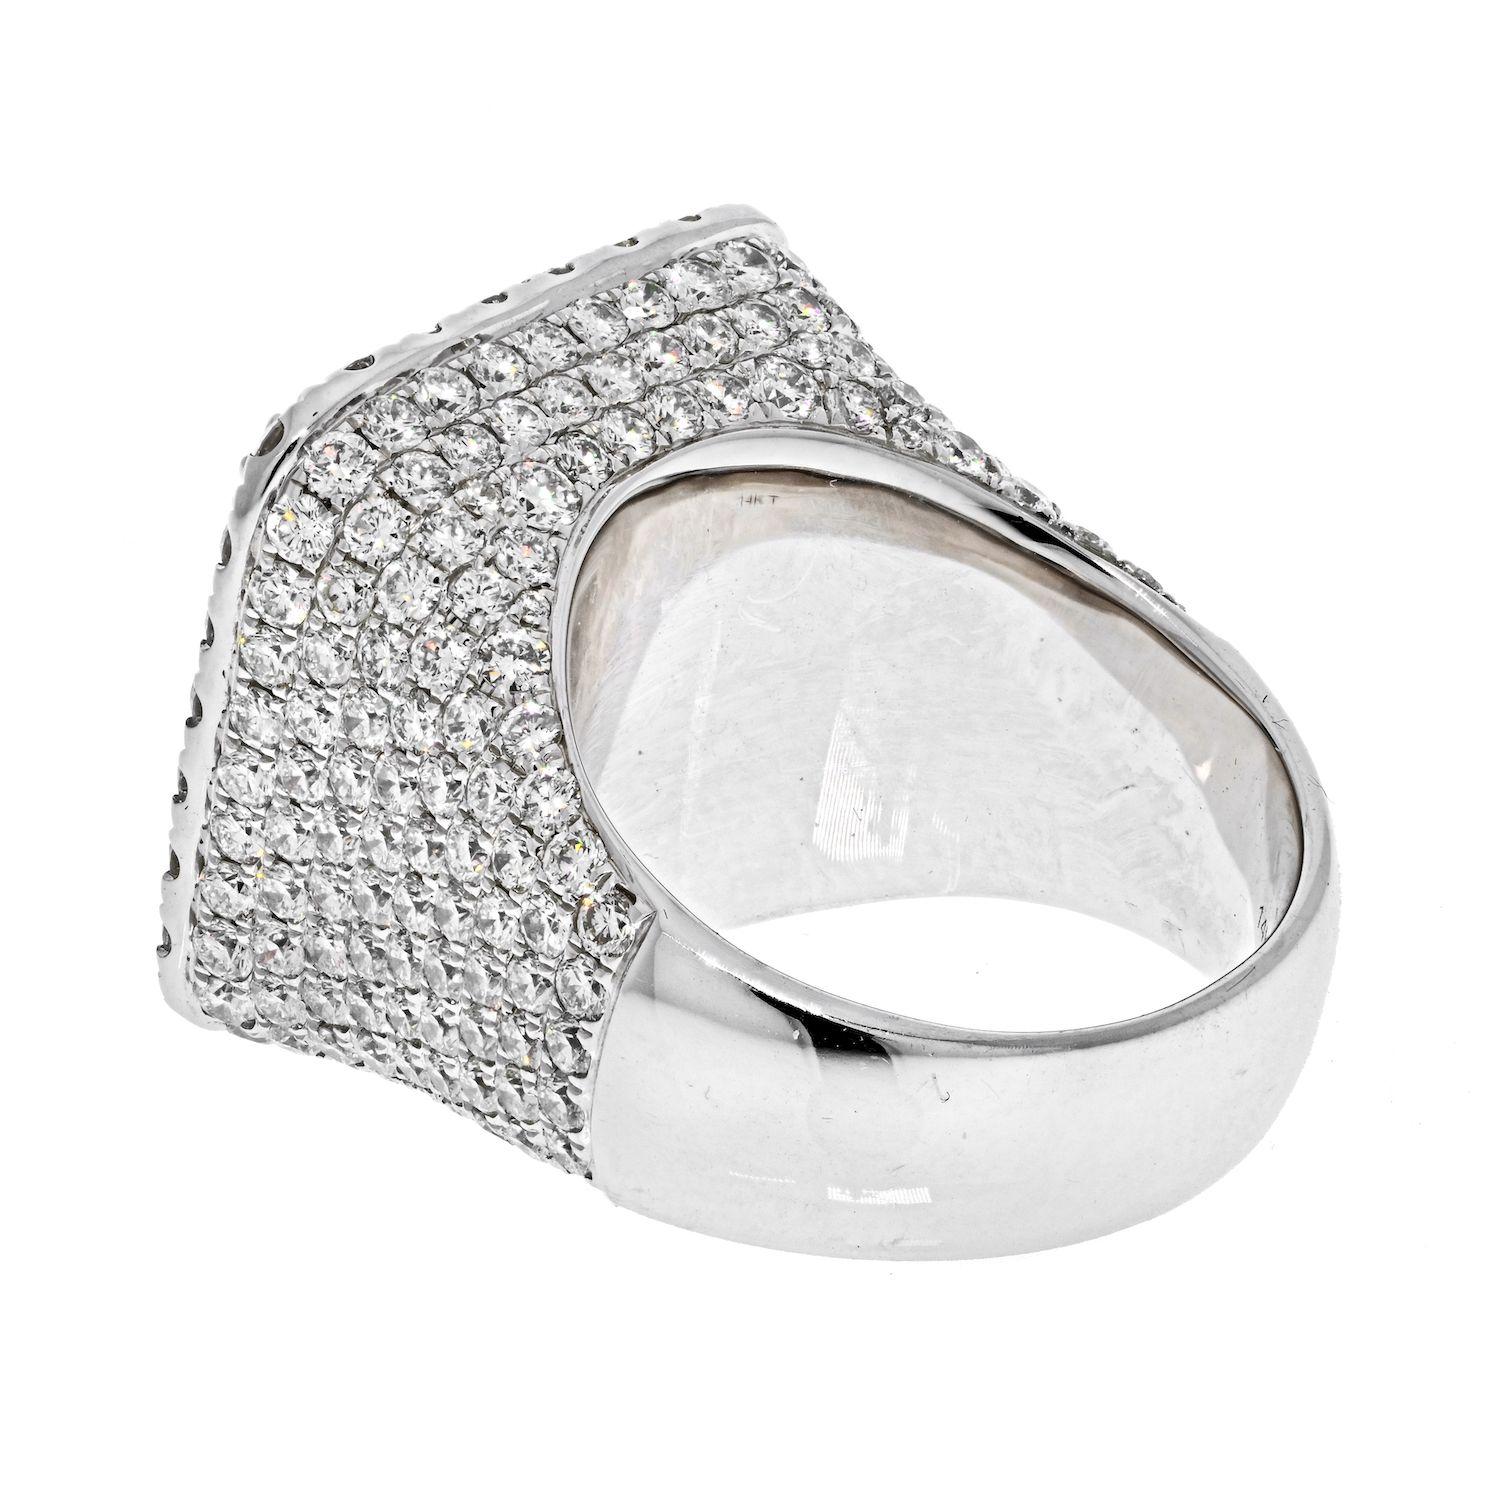 This is a high quality diamond ring for men. Crafted in 14k white gold mounted with significant size diamonds that are all clean and inclusions free. You will know what we mean when you see this ring in person. 
Brilliant from every angle this